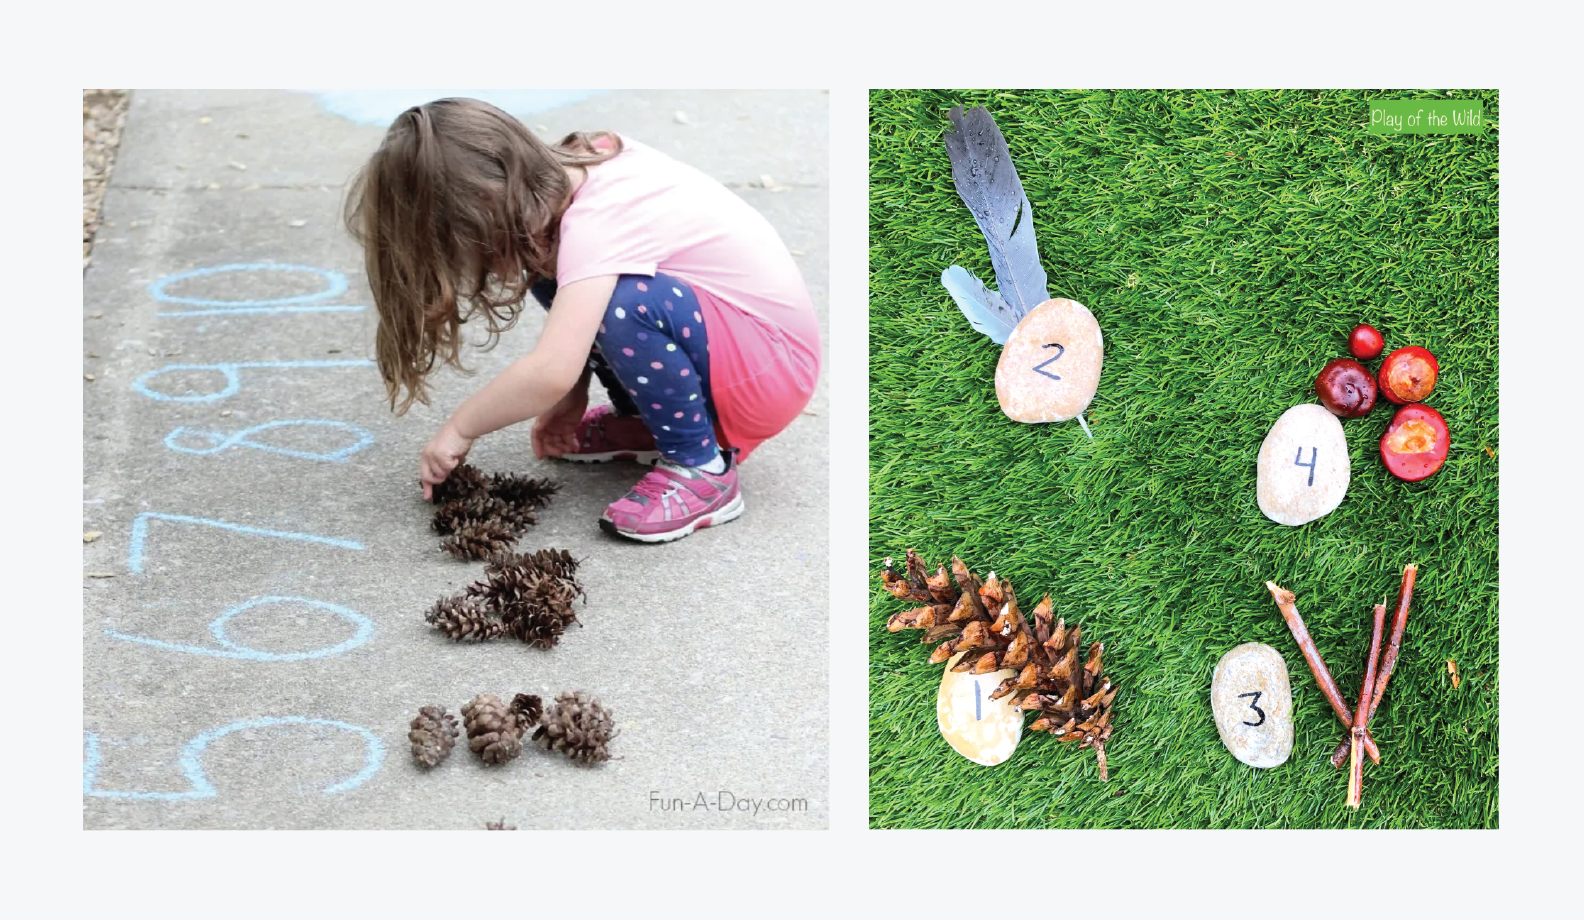 Two images side by side. The left shows a girl using pine cones to identify numbers. The right shows four items on the grass with number signs next to them